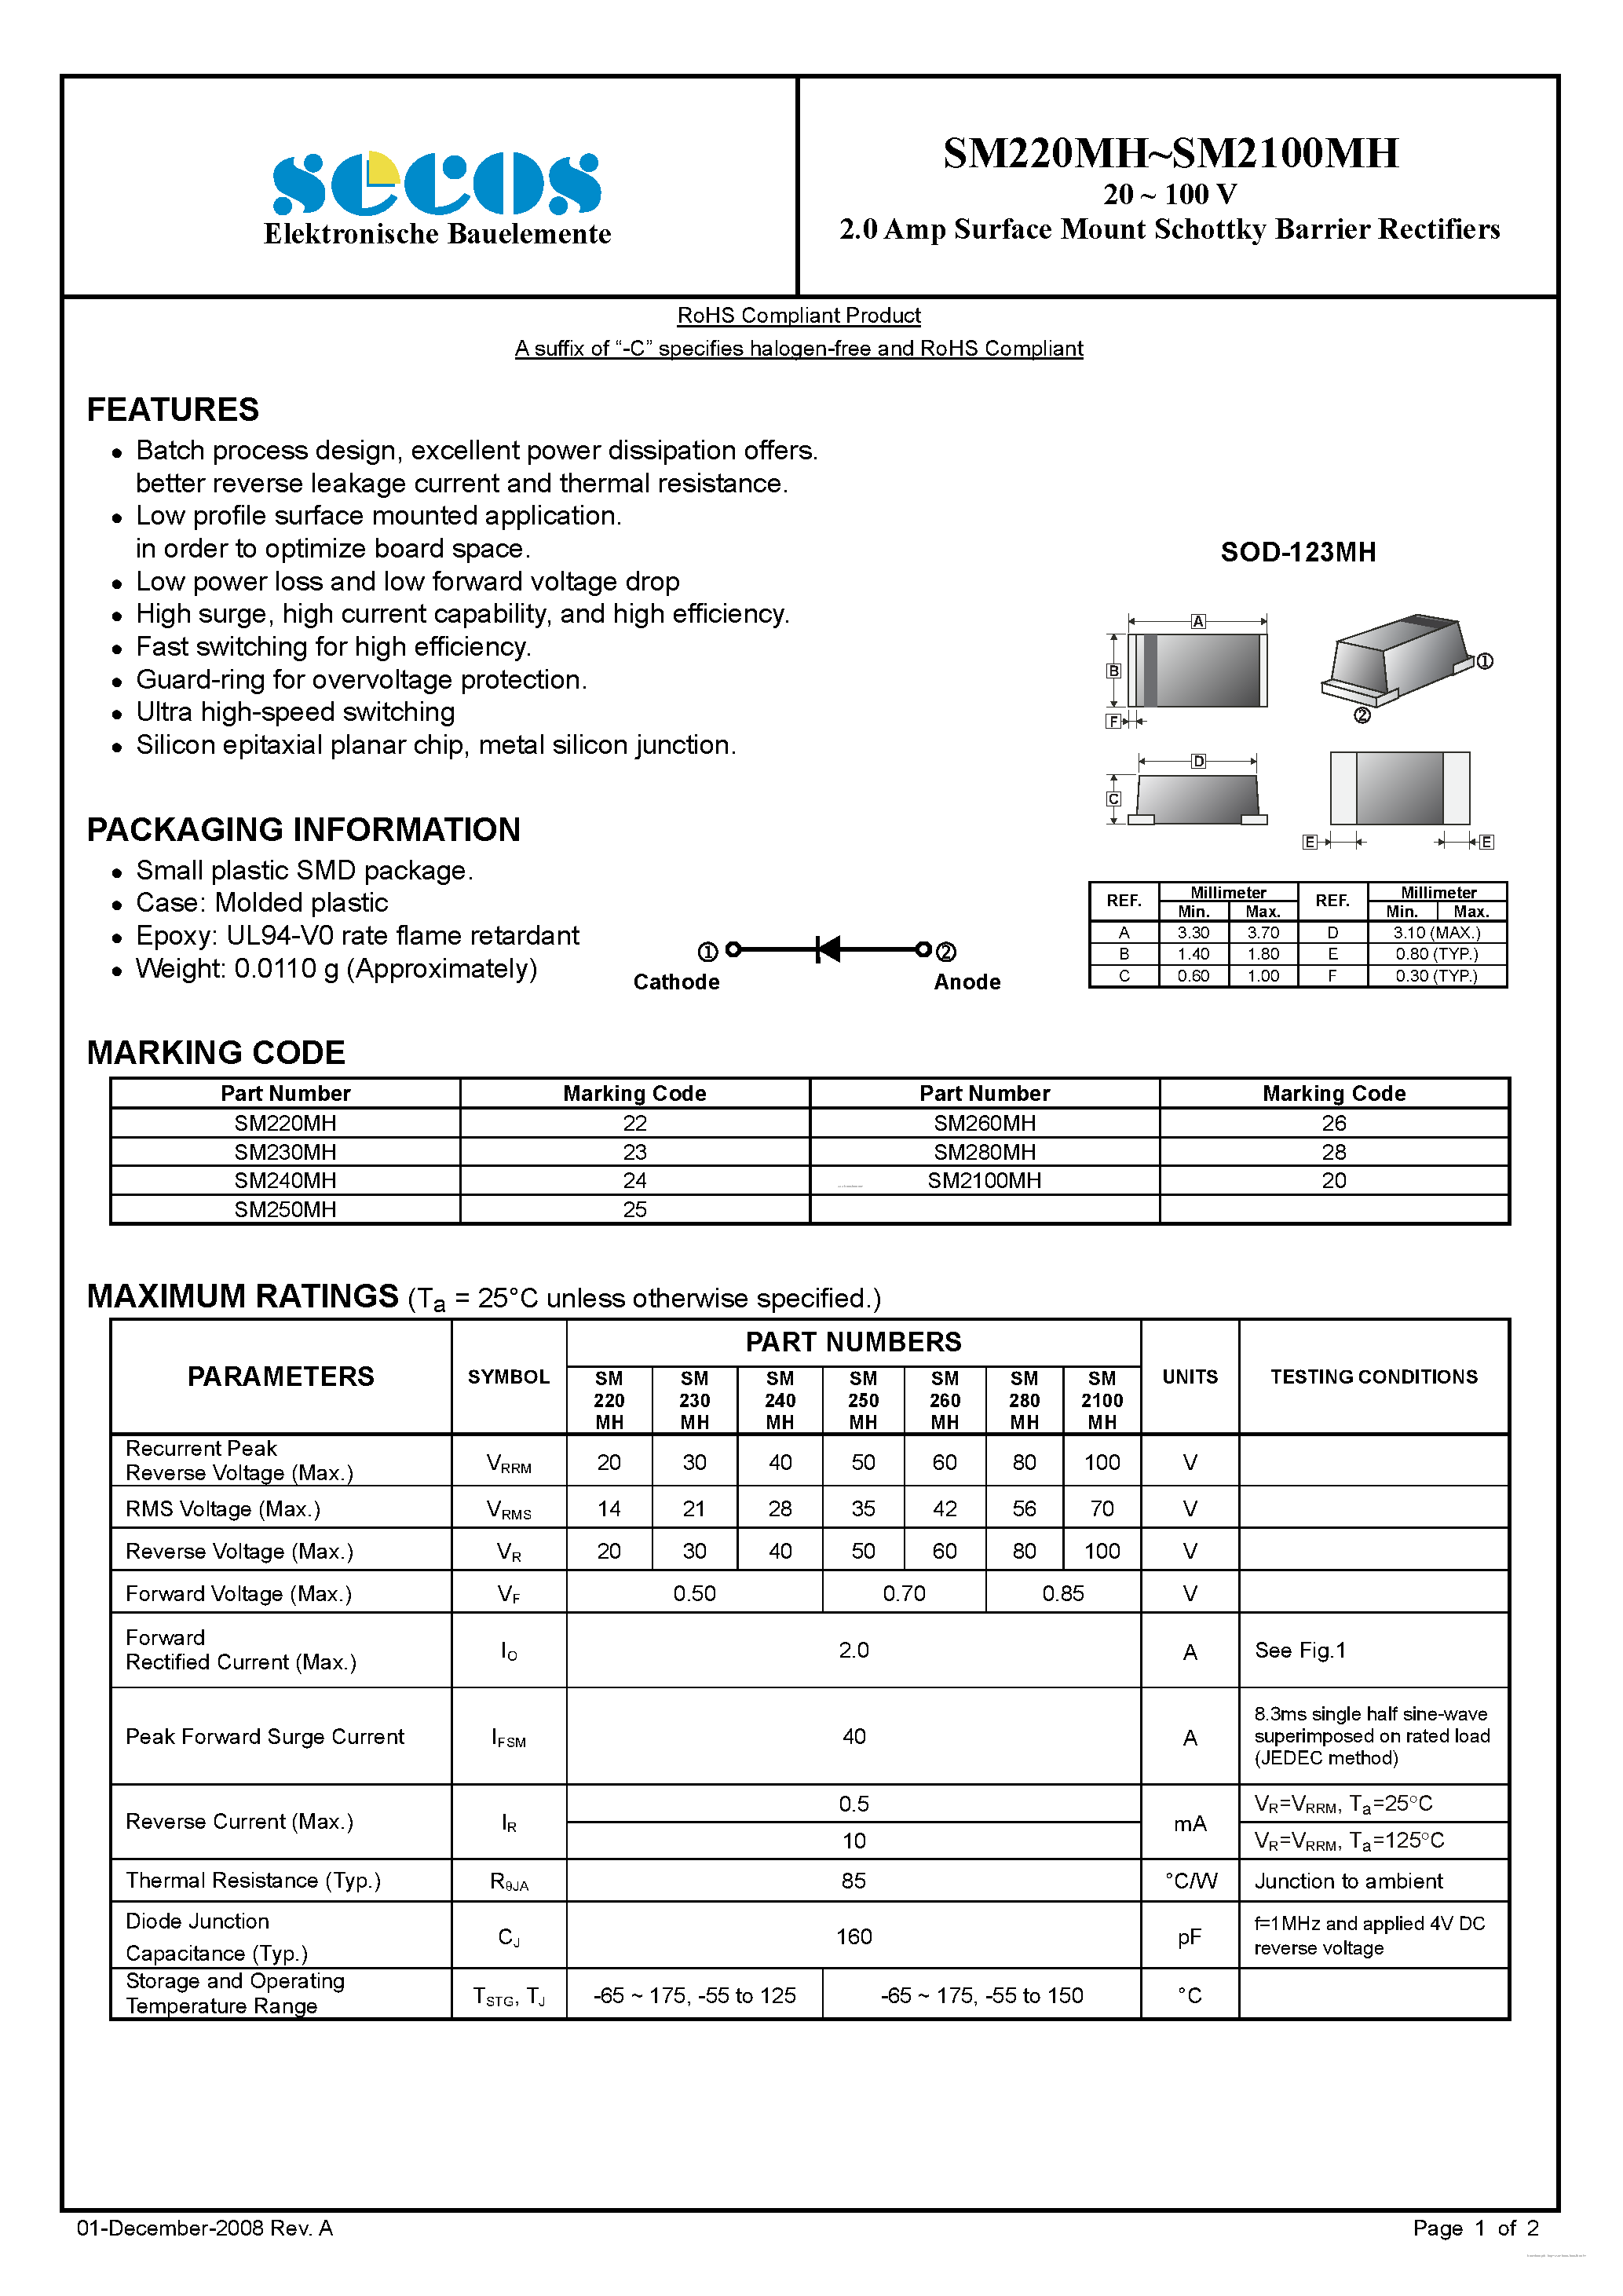 Datasheet SM2100MH - (SM220MH - SM2100MH) Surface Mount Schottky Barrier Rectifiers page 1